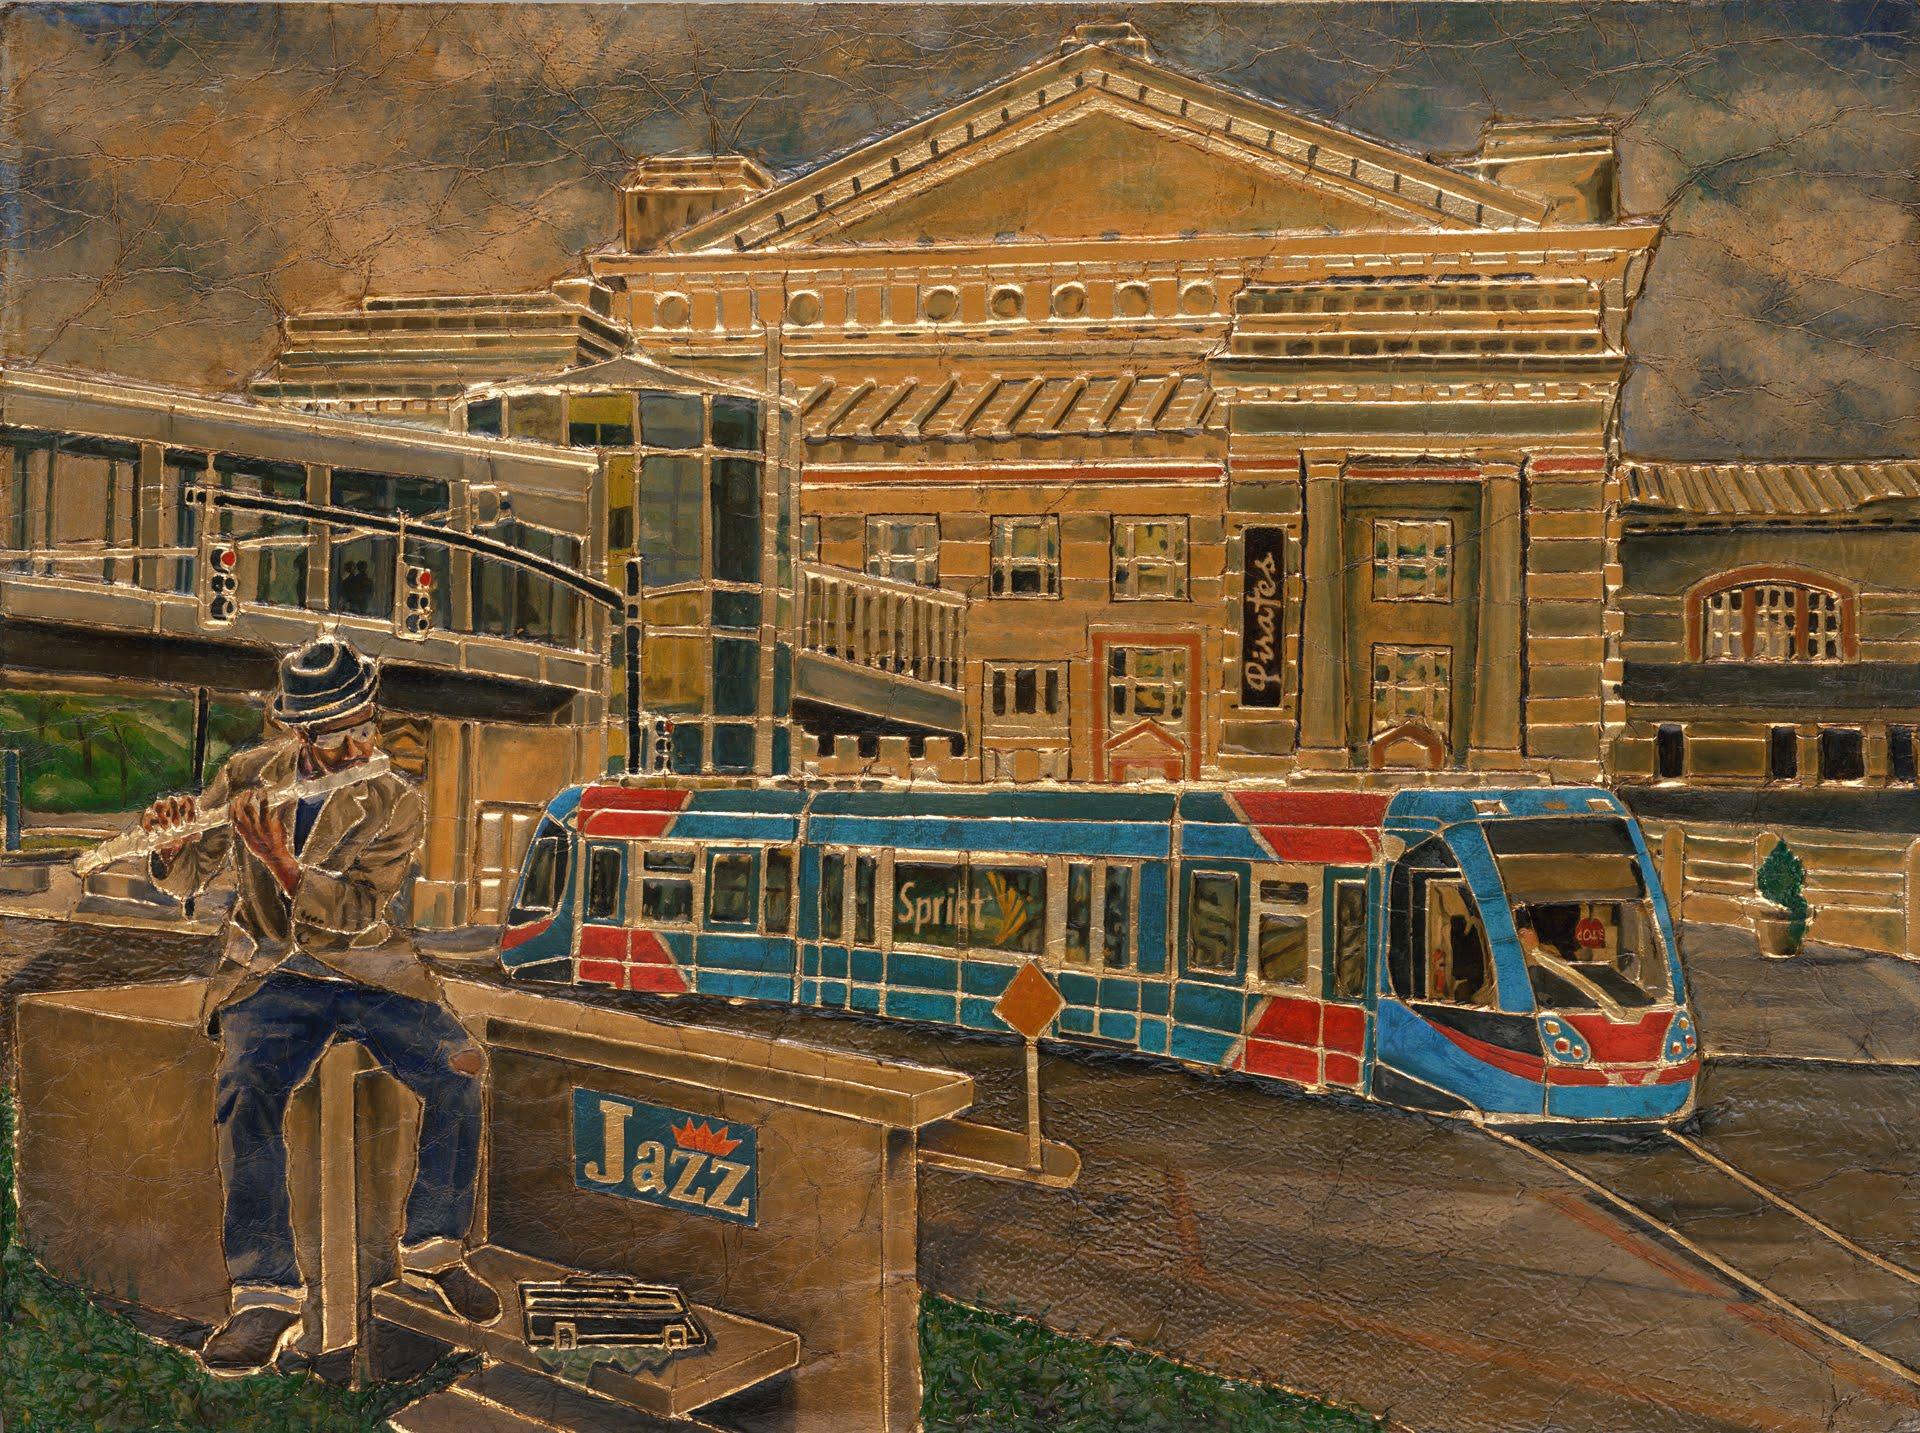 Collagraph print with a building in the background, a blue train running through, and a musician playing flute in the foreground.